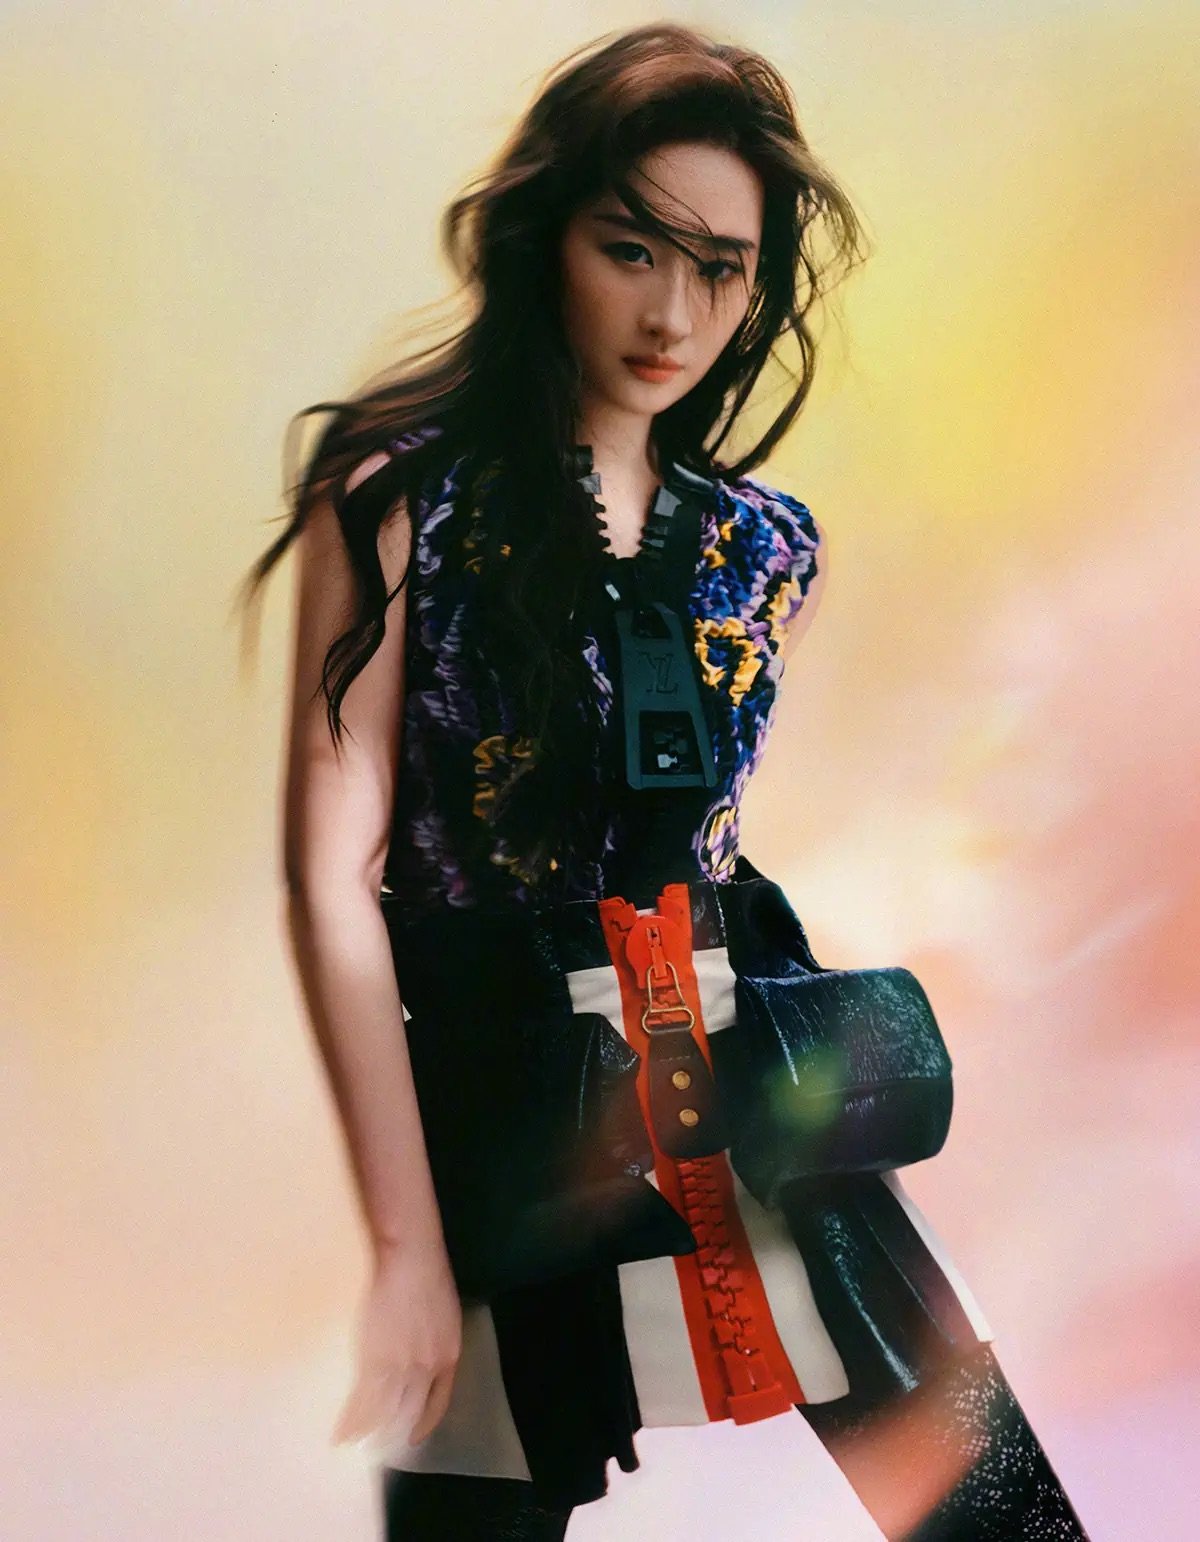 Mulan' Star Becomes the New Face of Louis Vuitton in China